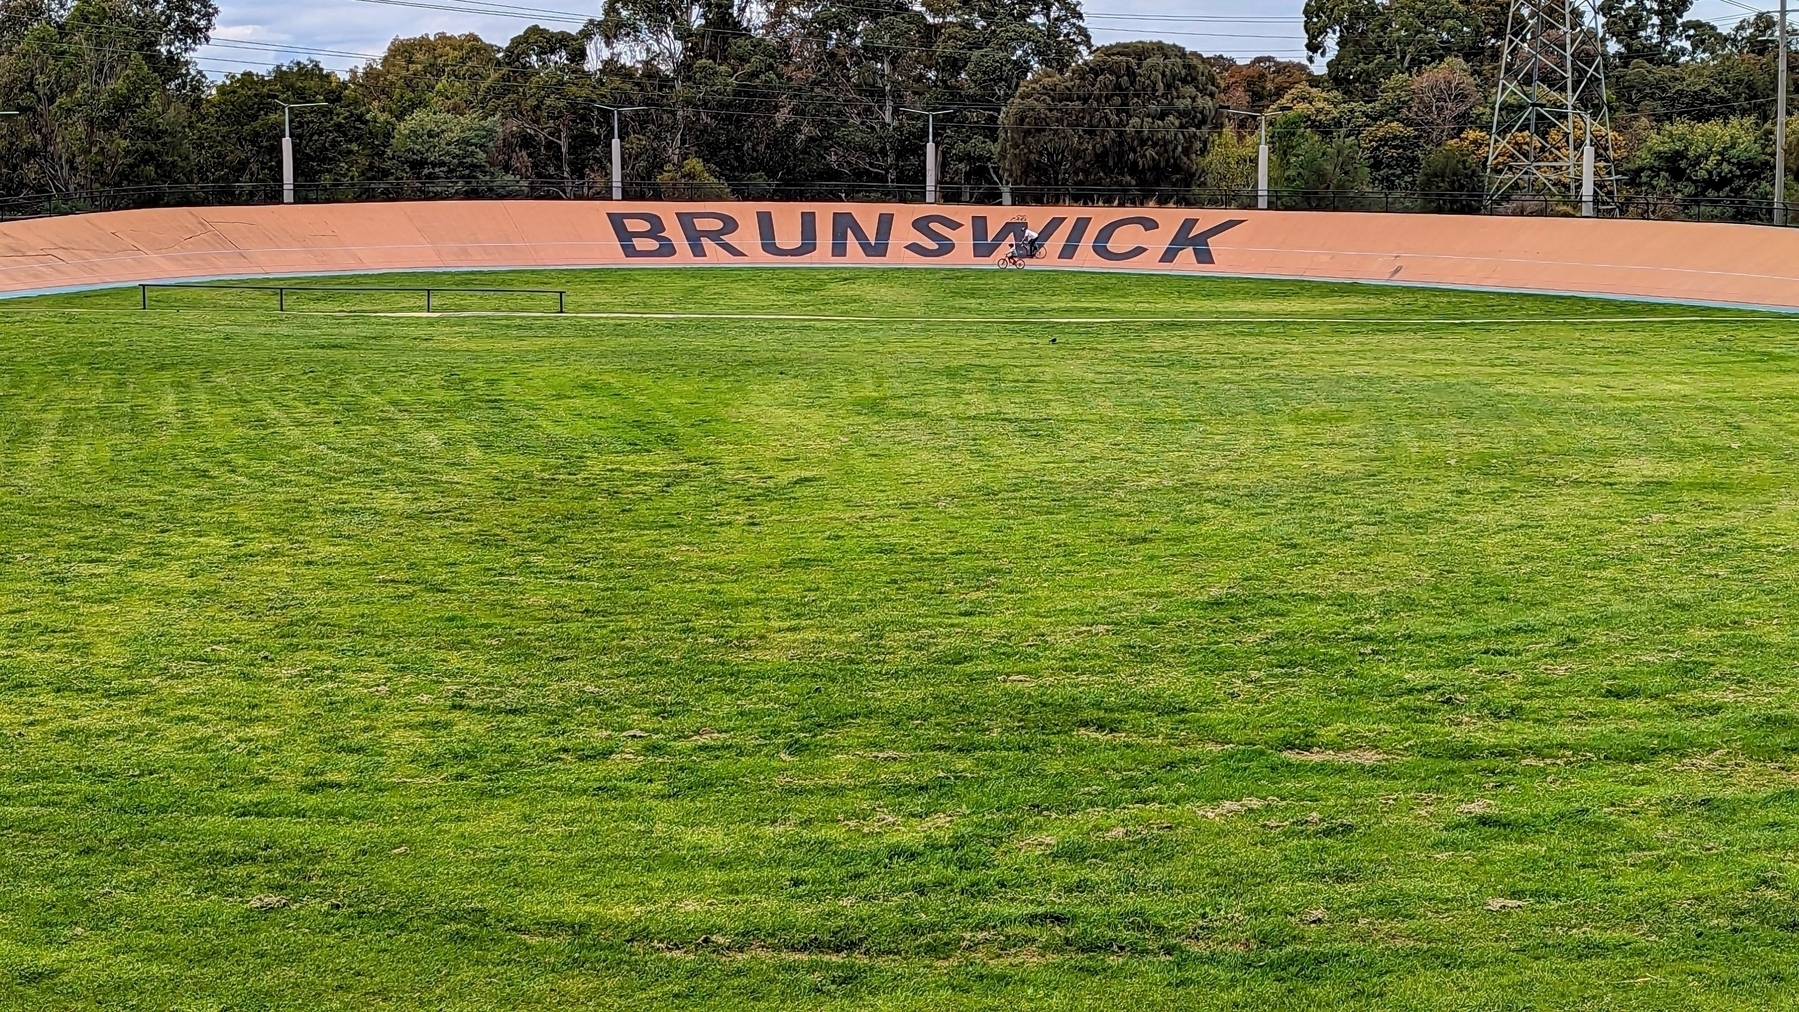 An outdoor velodrome in Melbourne, with an expanse of green grass in the foreground. A training cyclist is almost camouflaged by the large sign on the track: BRUNSWICK.